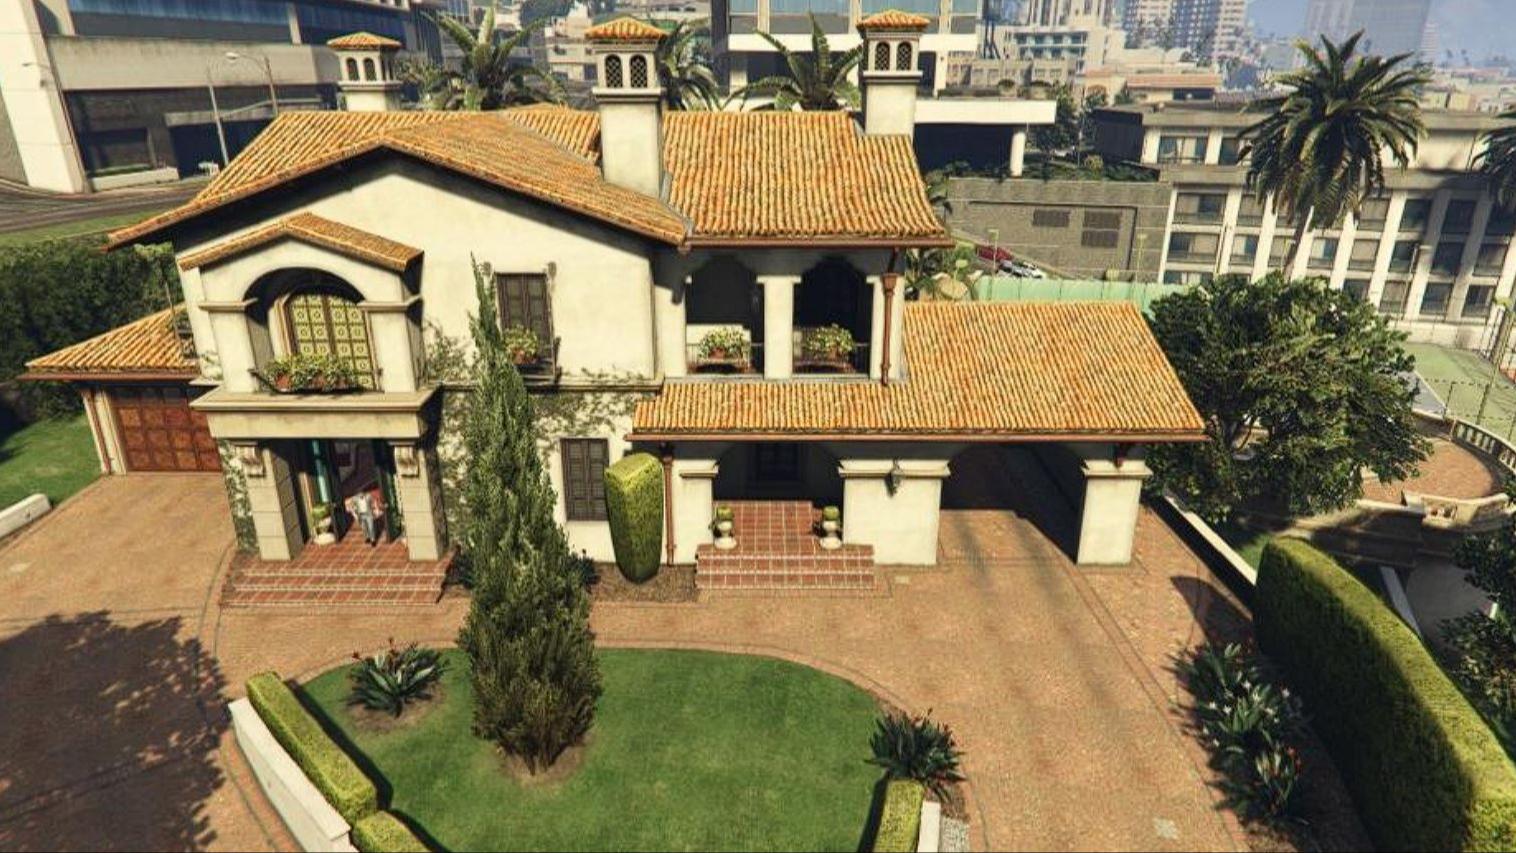 All the houses you can buy in gta 5 (116) фото